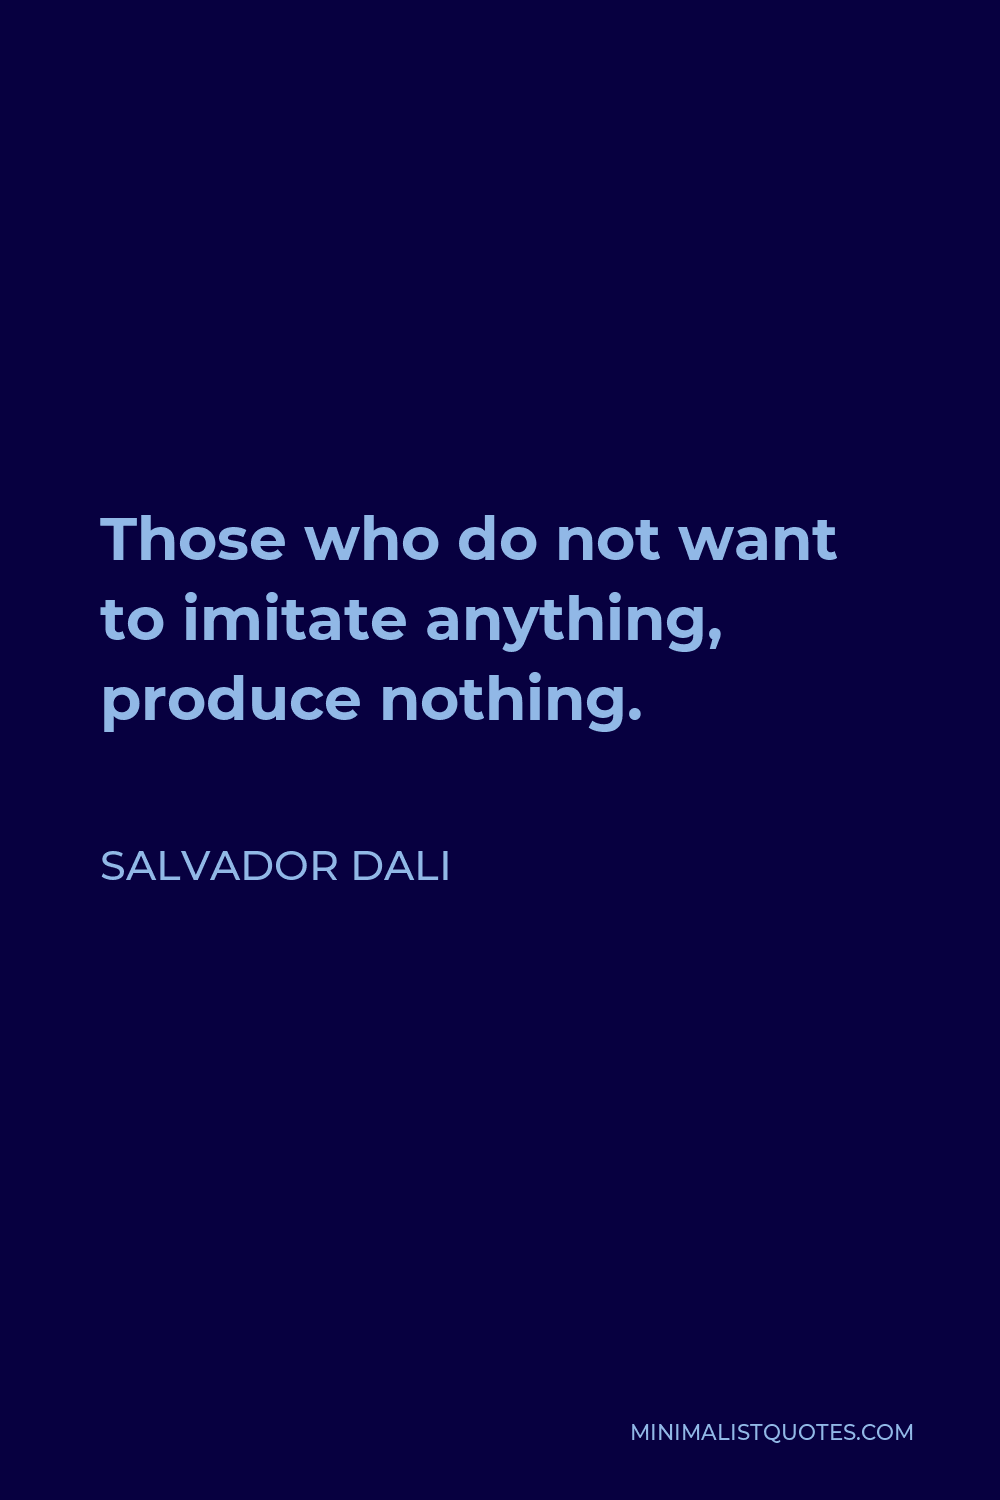 Salvador Dali Quote - Those who do not want to imitate anything, produce nothing.